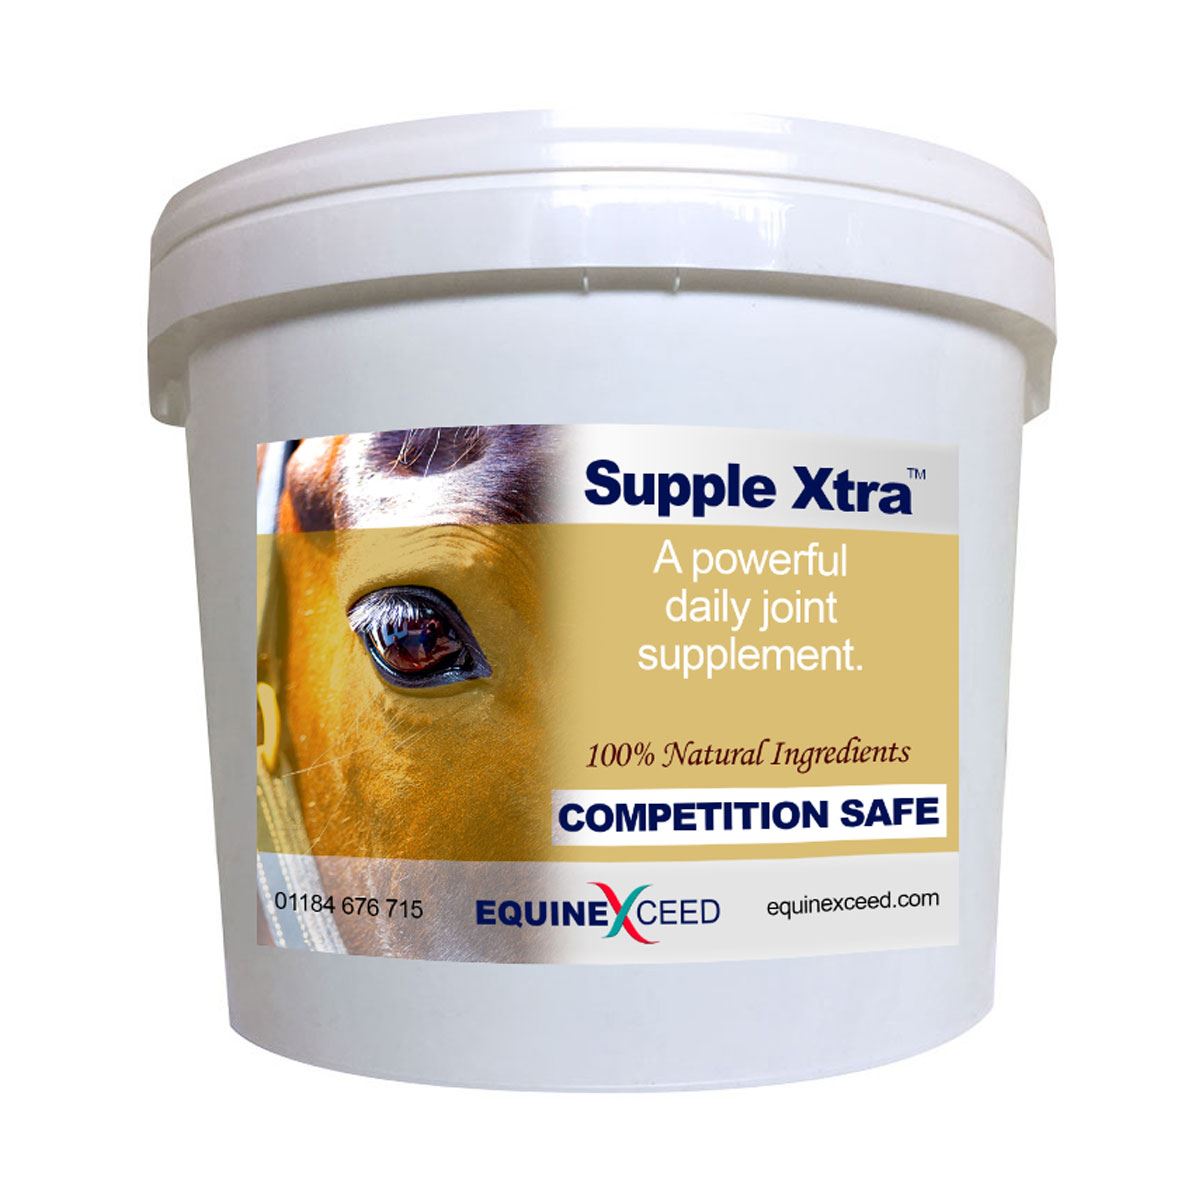 Equine Exceed Supple Xtra - Just Horse Riders